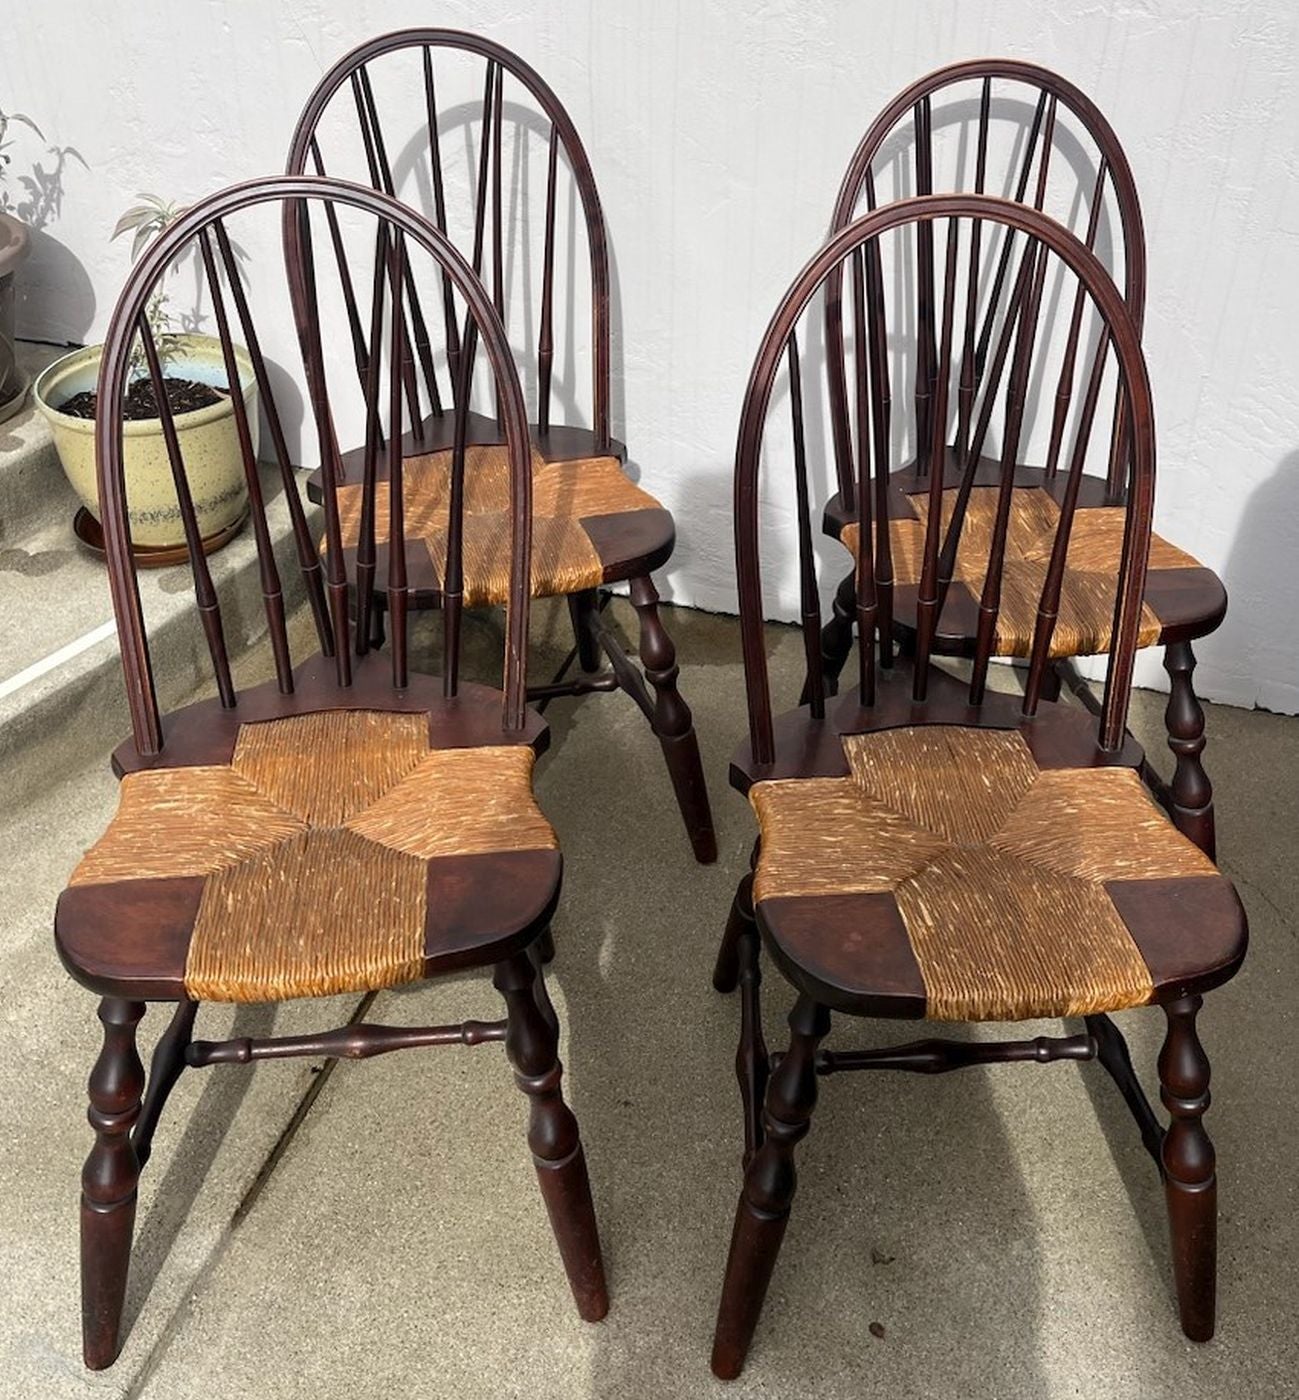 Set of four signed Nichols & Stone Windsor dining chairs, circa 1930s, original rush seats and signed on the base.
Chairs are in great condition.